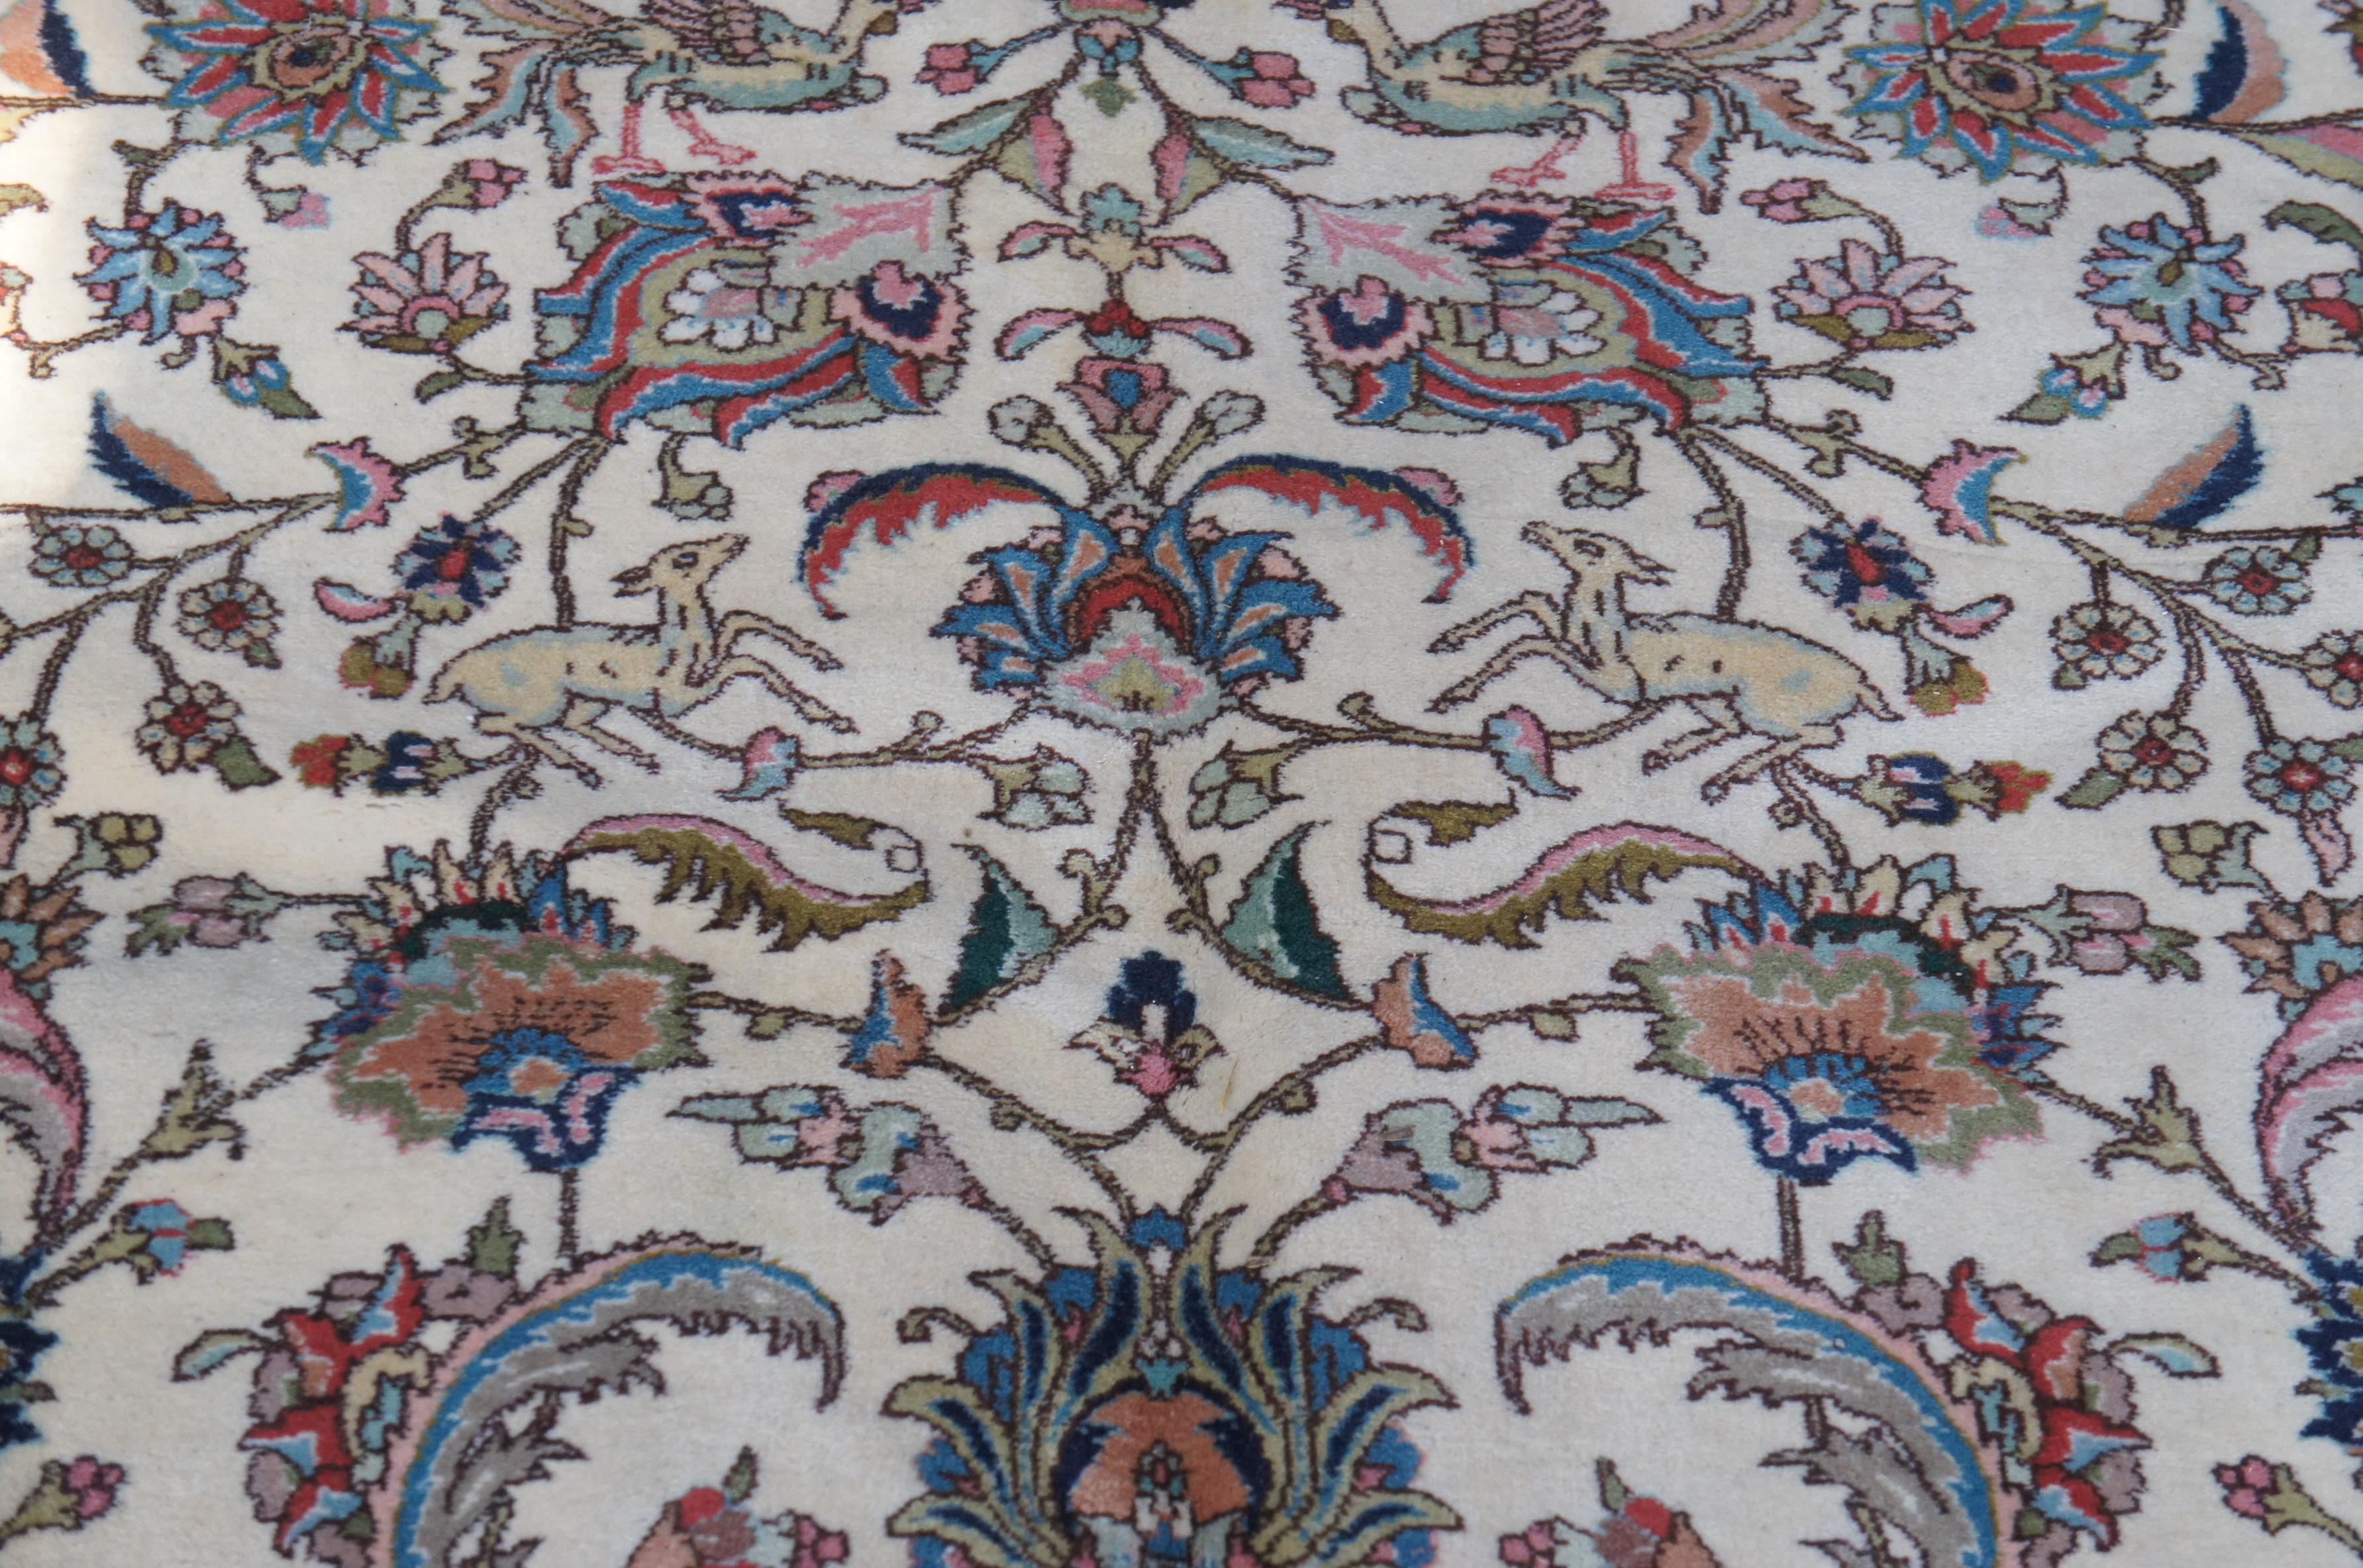 Monumental Persian Tabriz Wool Animal Bird Design Area Rug Carpet 12' x 19' In Good Condition For Sale In Dayton, OH